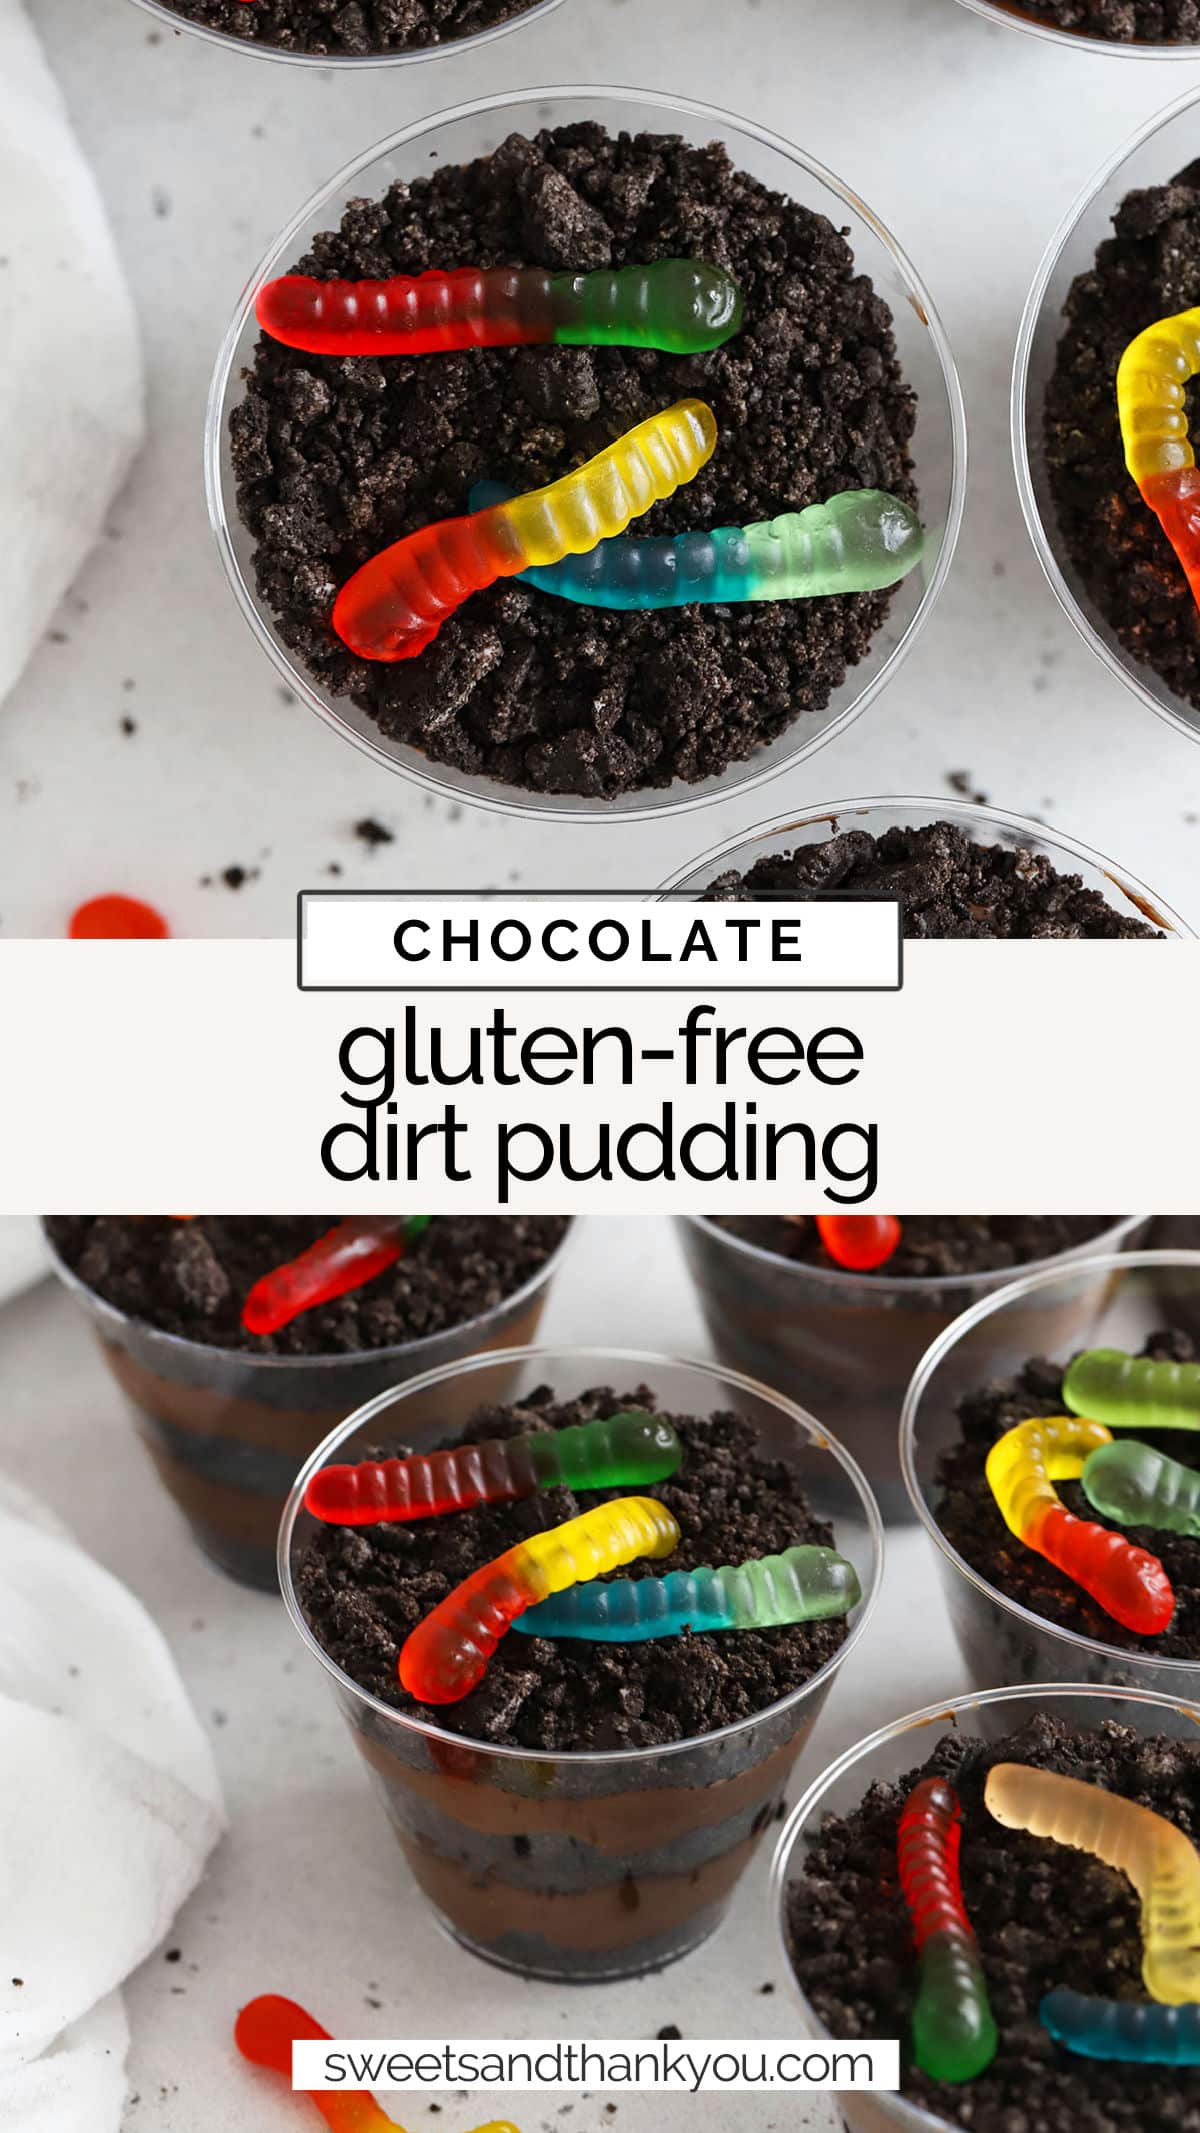 Get nostalgic with this easy gluten-free dirt pudding recipe! Don't miss all the cute ways to decorate it in the post. (+Halloween Ideas!) / Halloween dirt pudding ideas / cute dirt pudding ideas / gluten-free dirt pudding for halloween / dirt pudding recipe / gluten-free dirt cake recipe / gluten-free dirt cake / gluten-free halloween dessert / gluten-free pudding dessert / gluten-free pudding recipe /